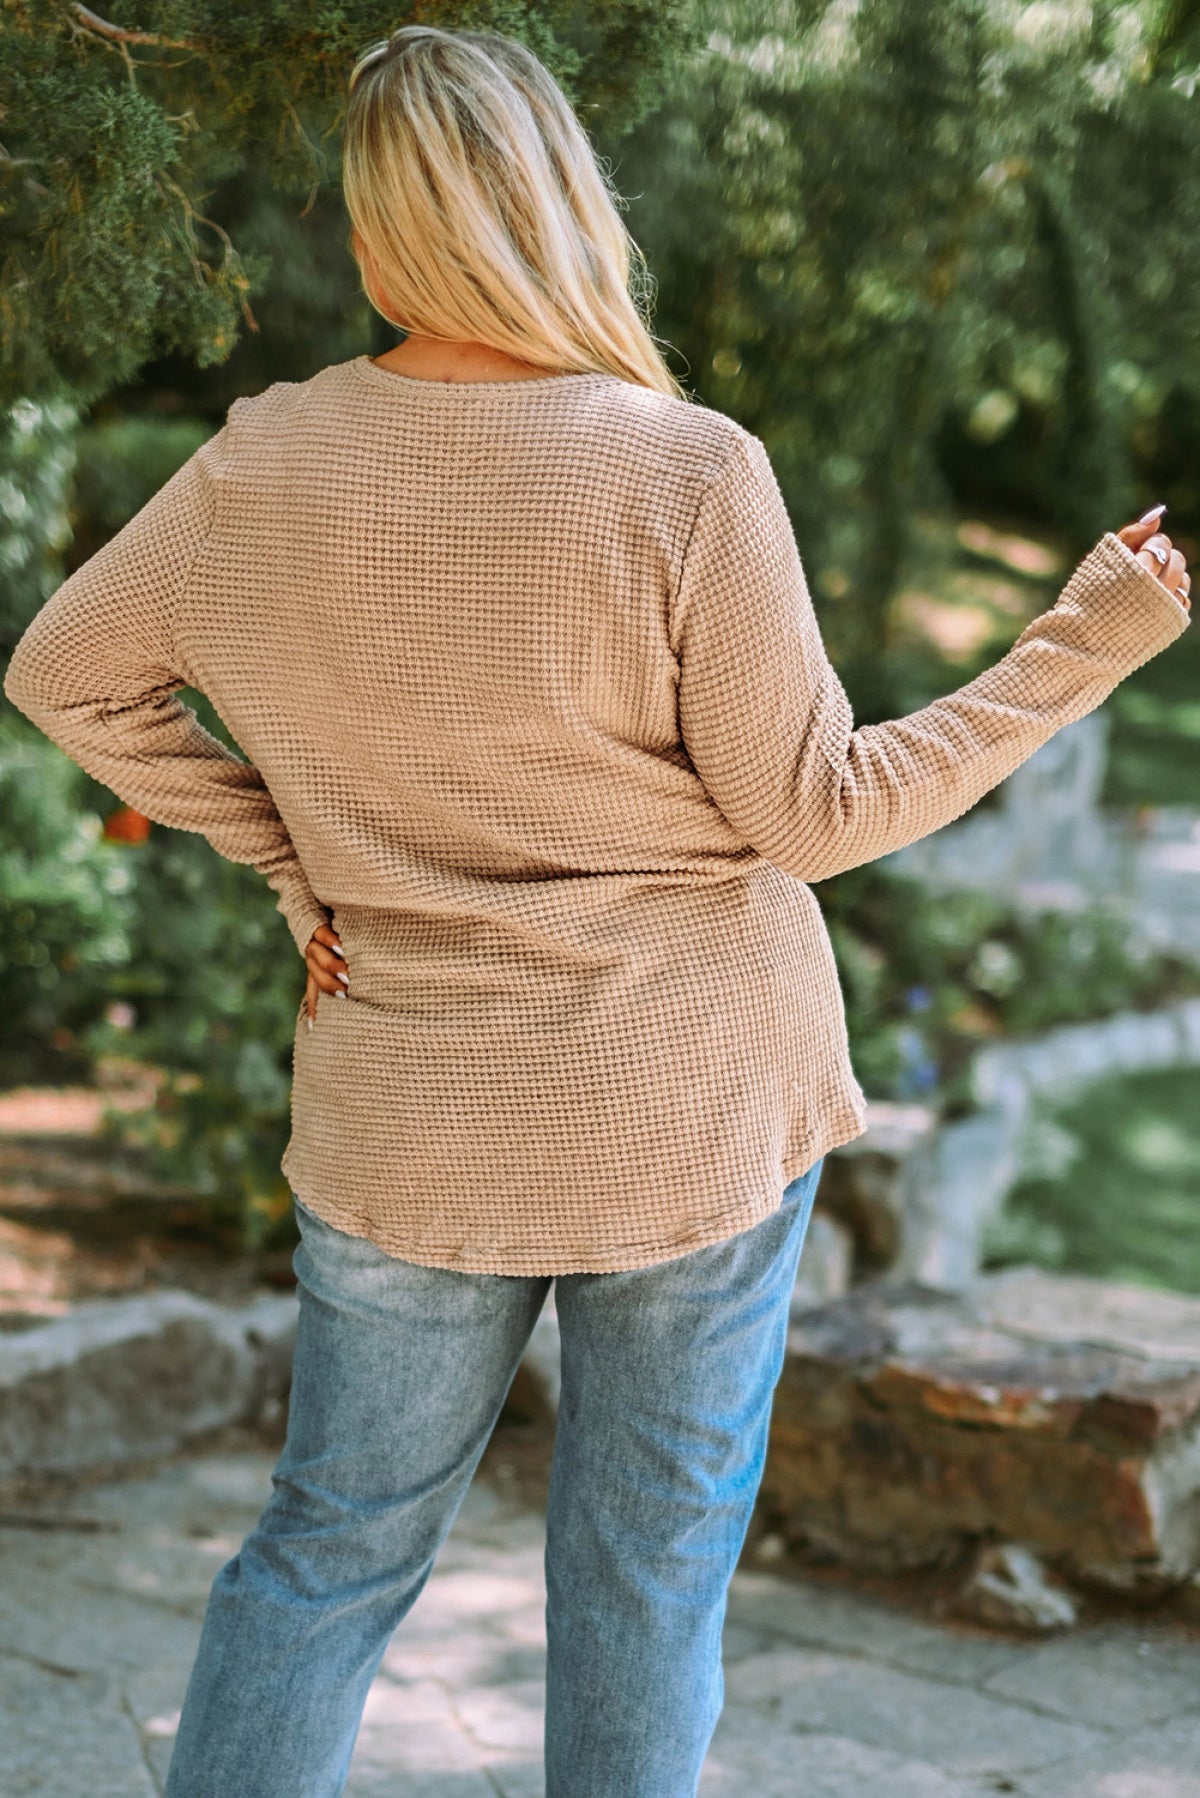 Khaki Plus Size Lace Waffle Knit Top | Art in Aging